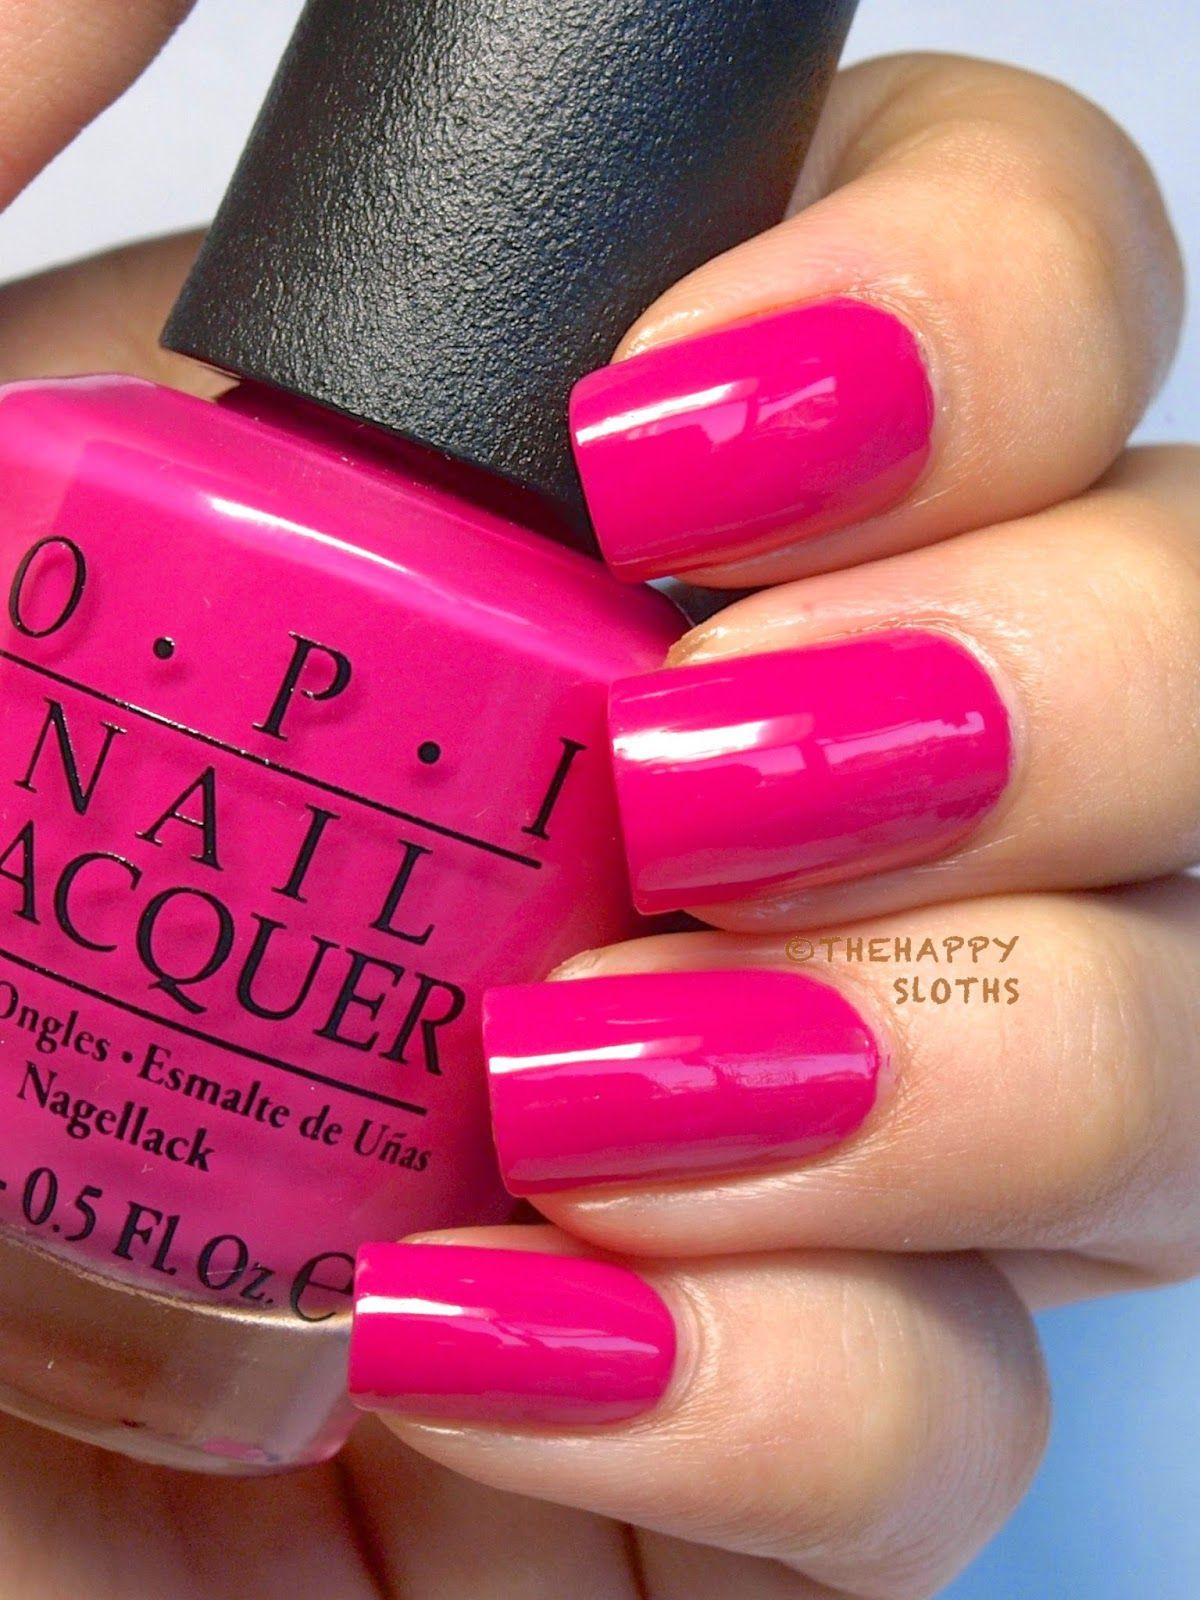 Opi Pink Nail Colors
 The 25 best Opi pink nail polish ideas on Pinterest